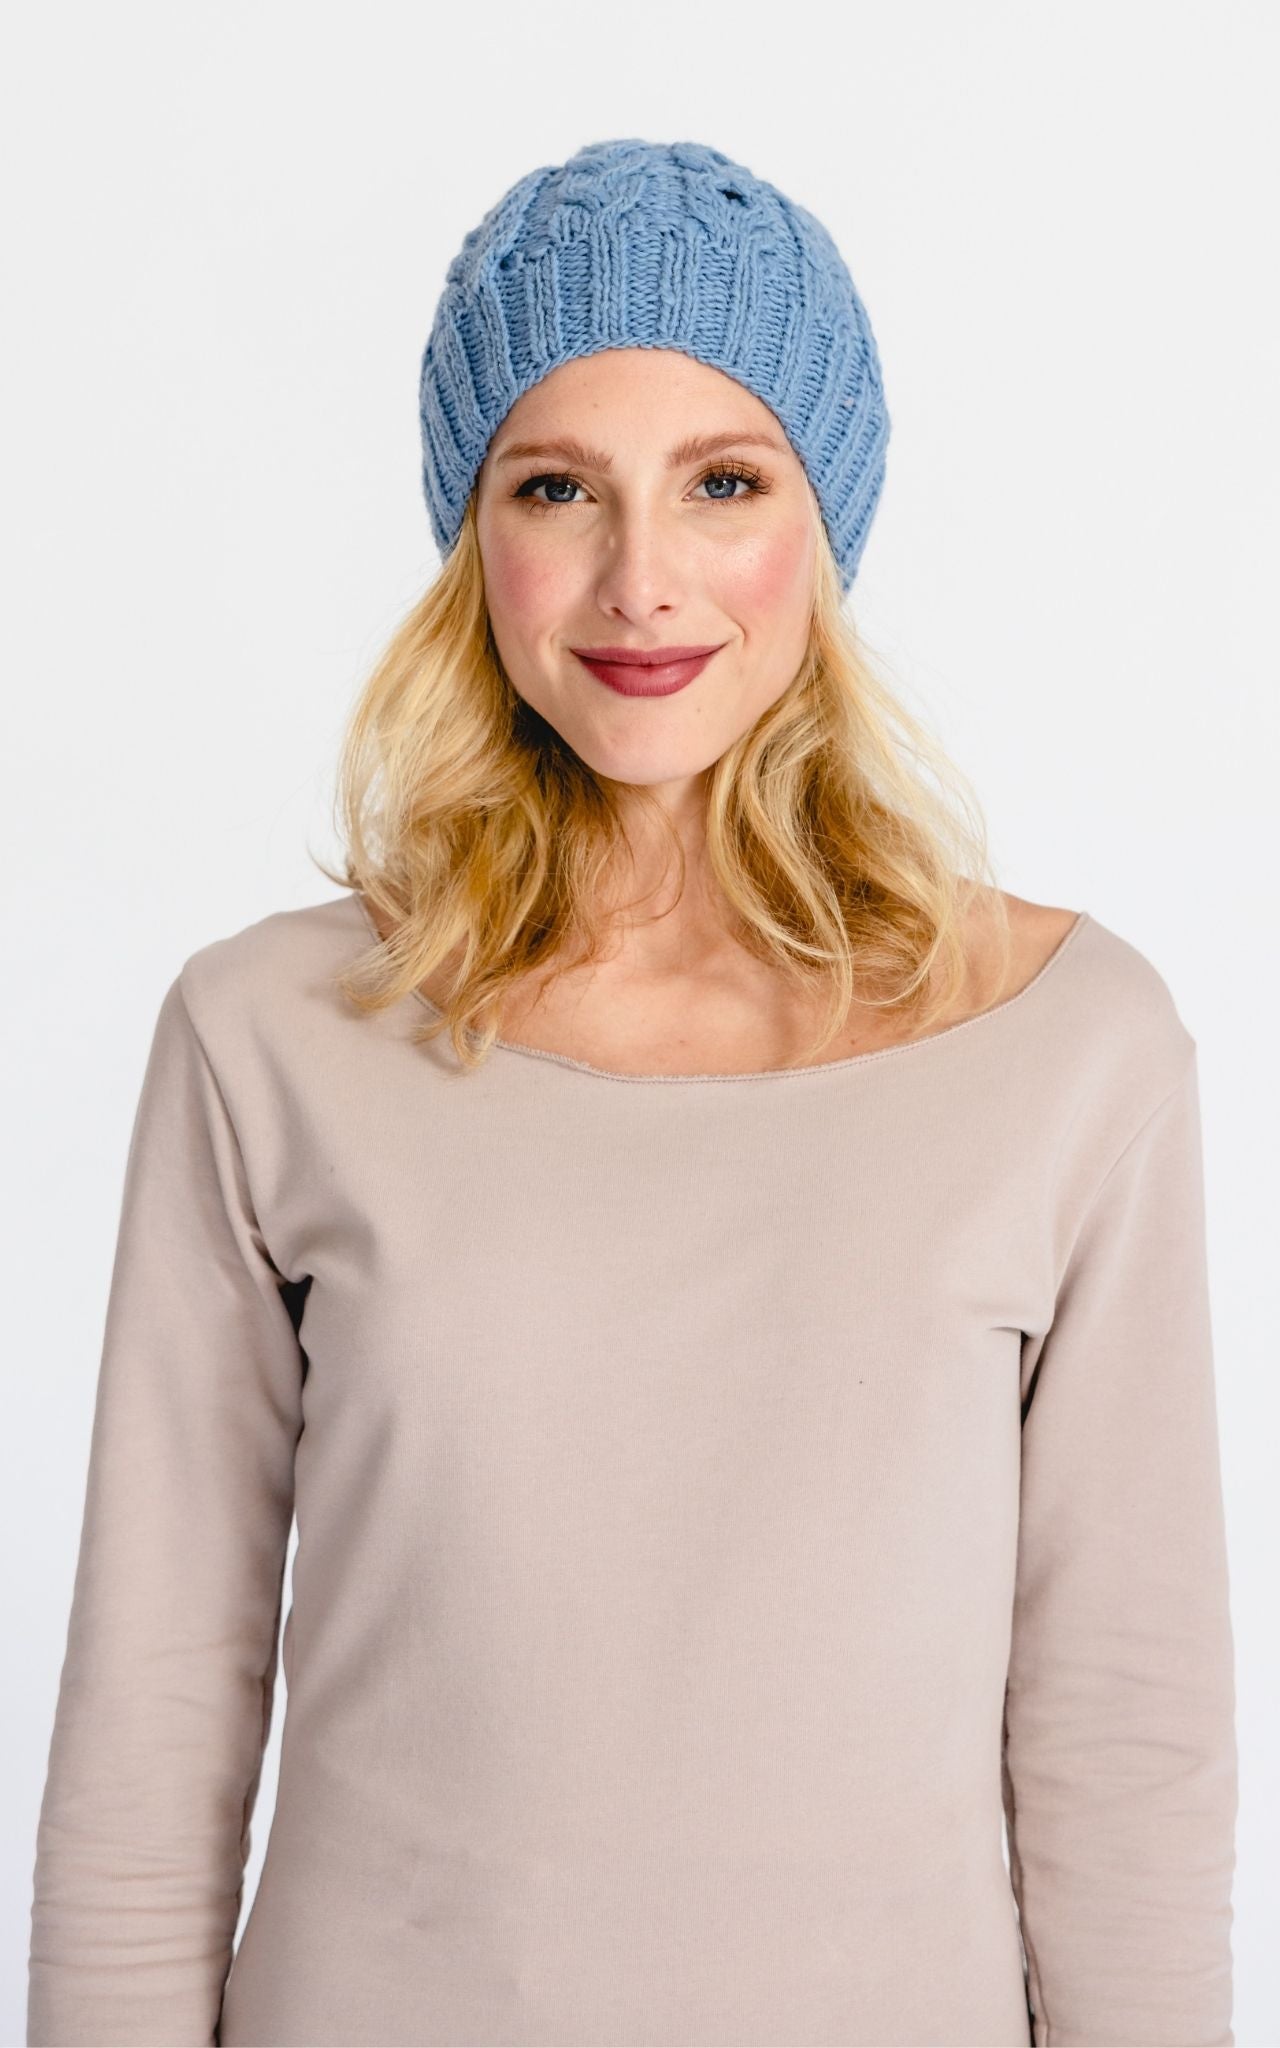 Surya Australia Ethical Cable Knit Merino Wool Beanie from Nepal - Light Blue